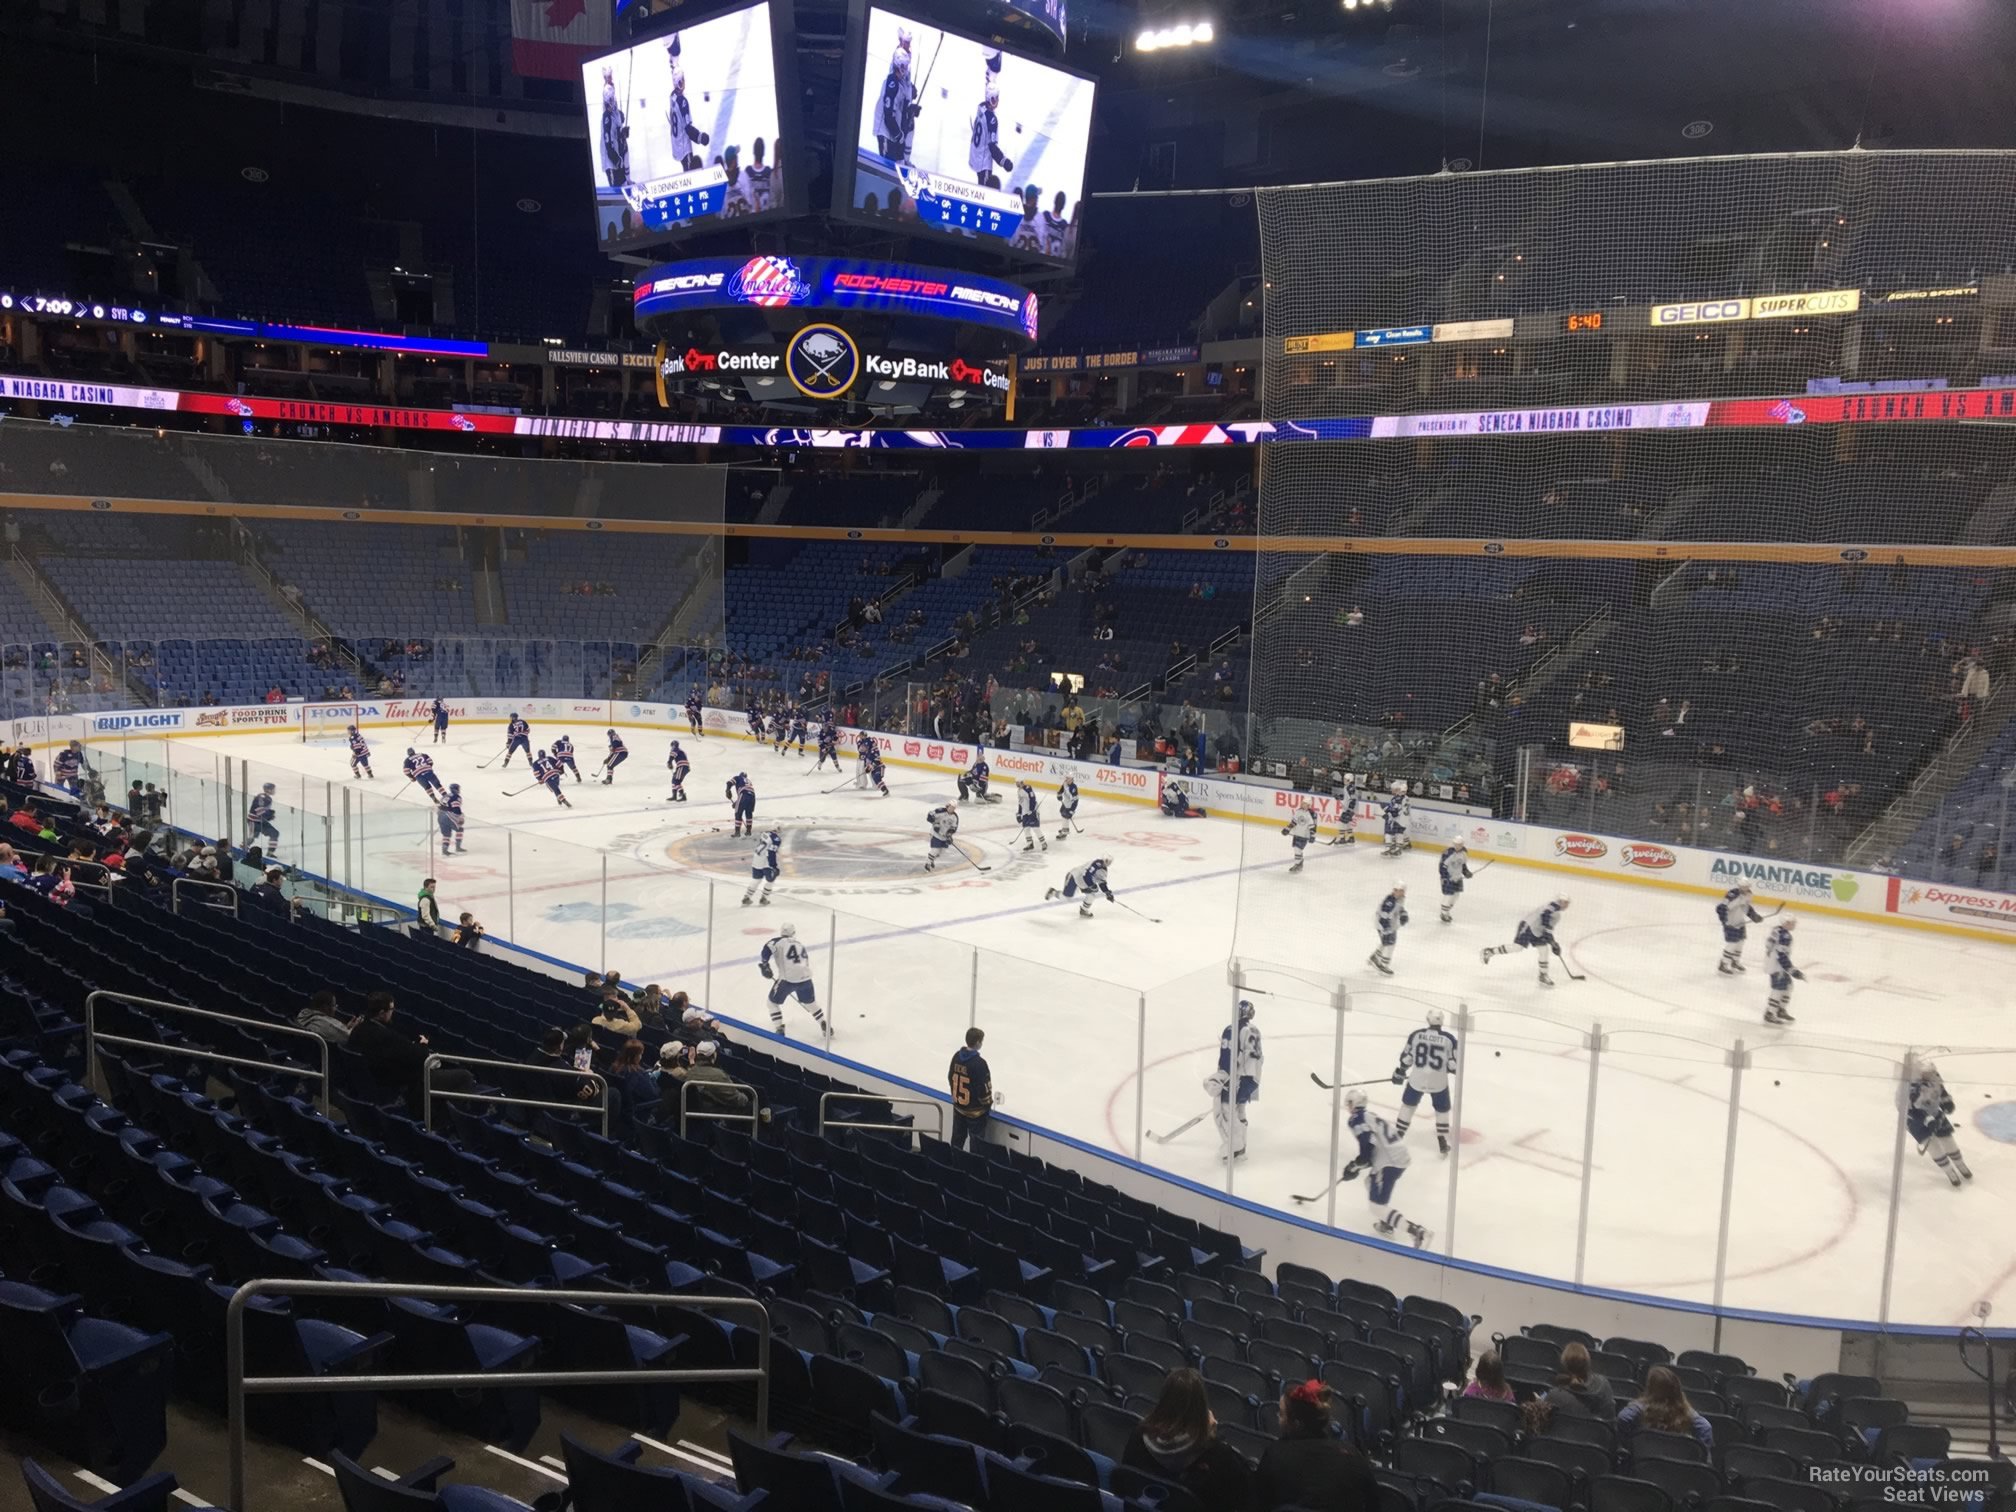 section 114, row 22 seat view  for hockey - keybank center